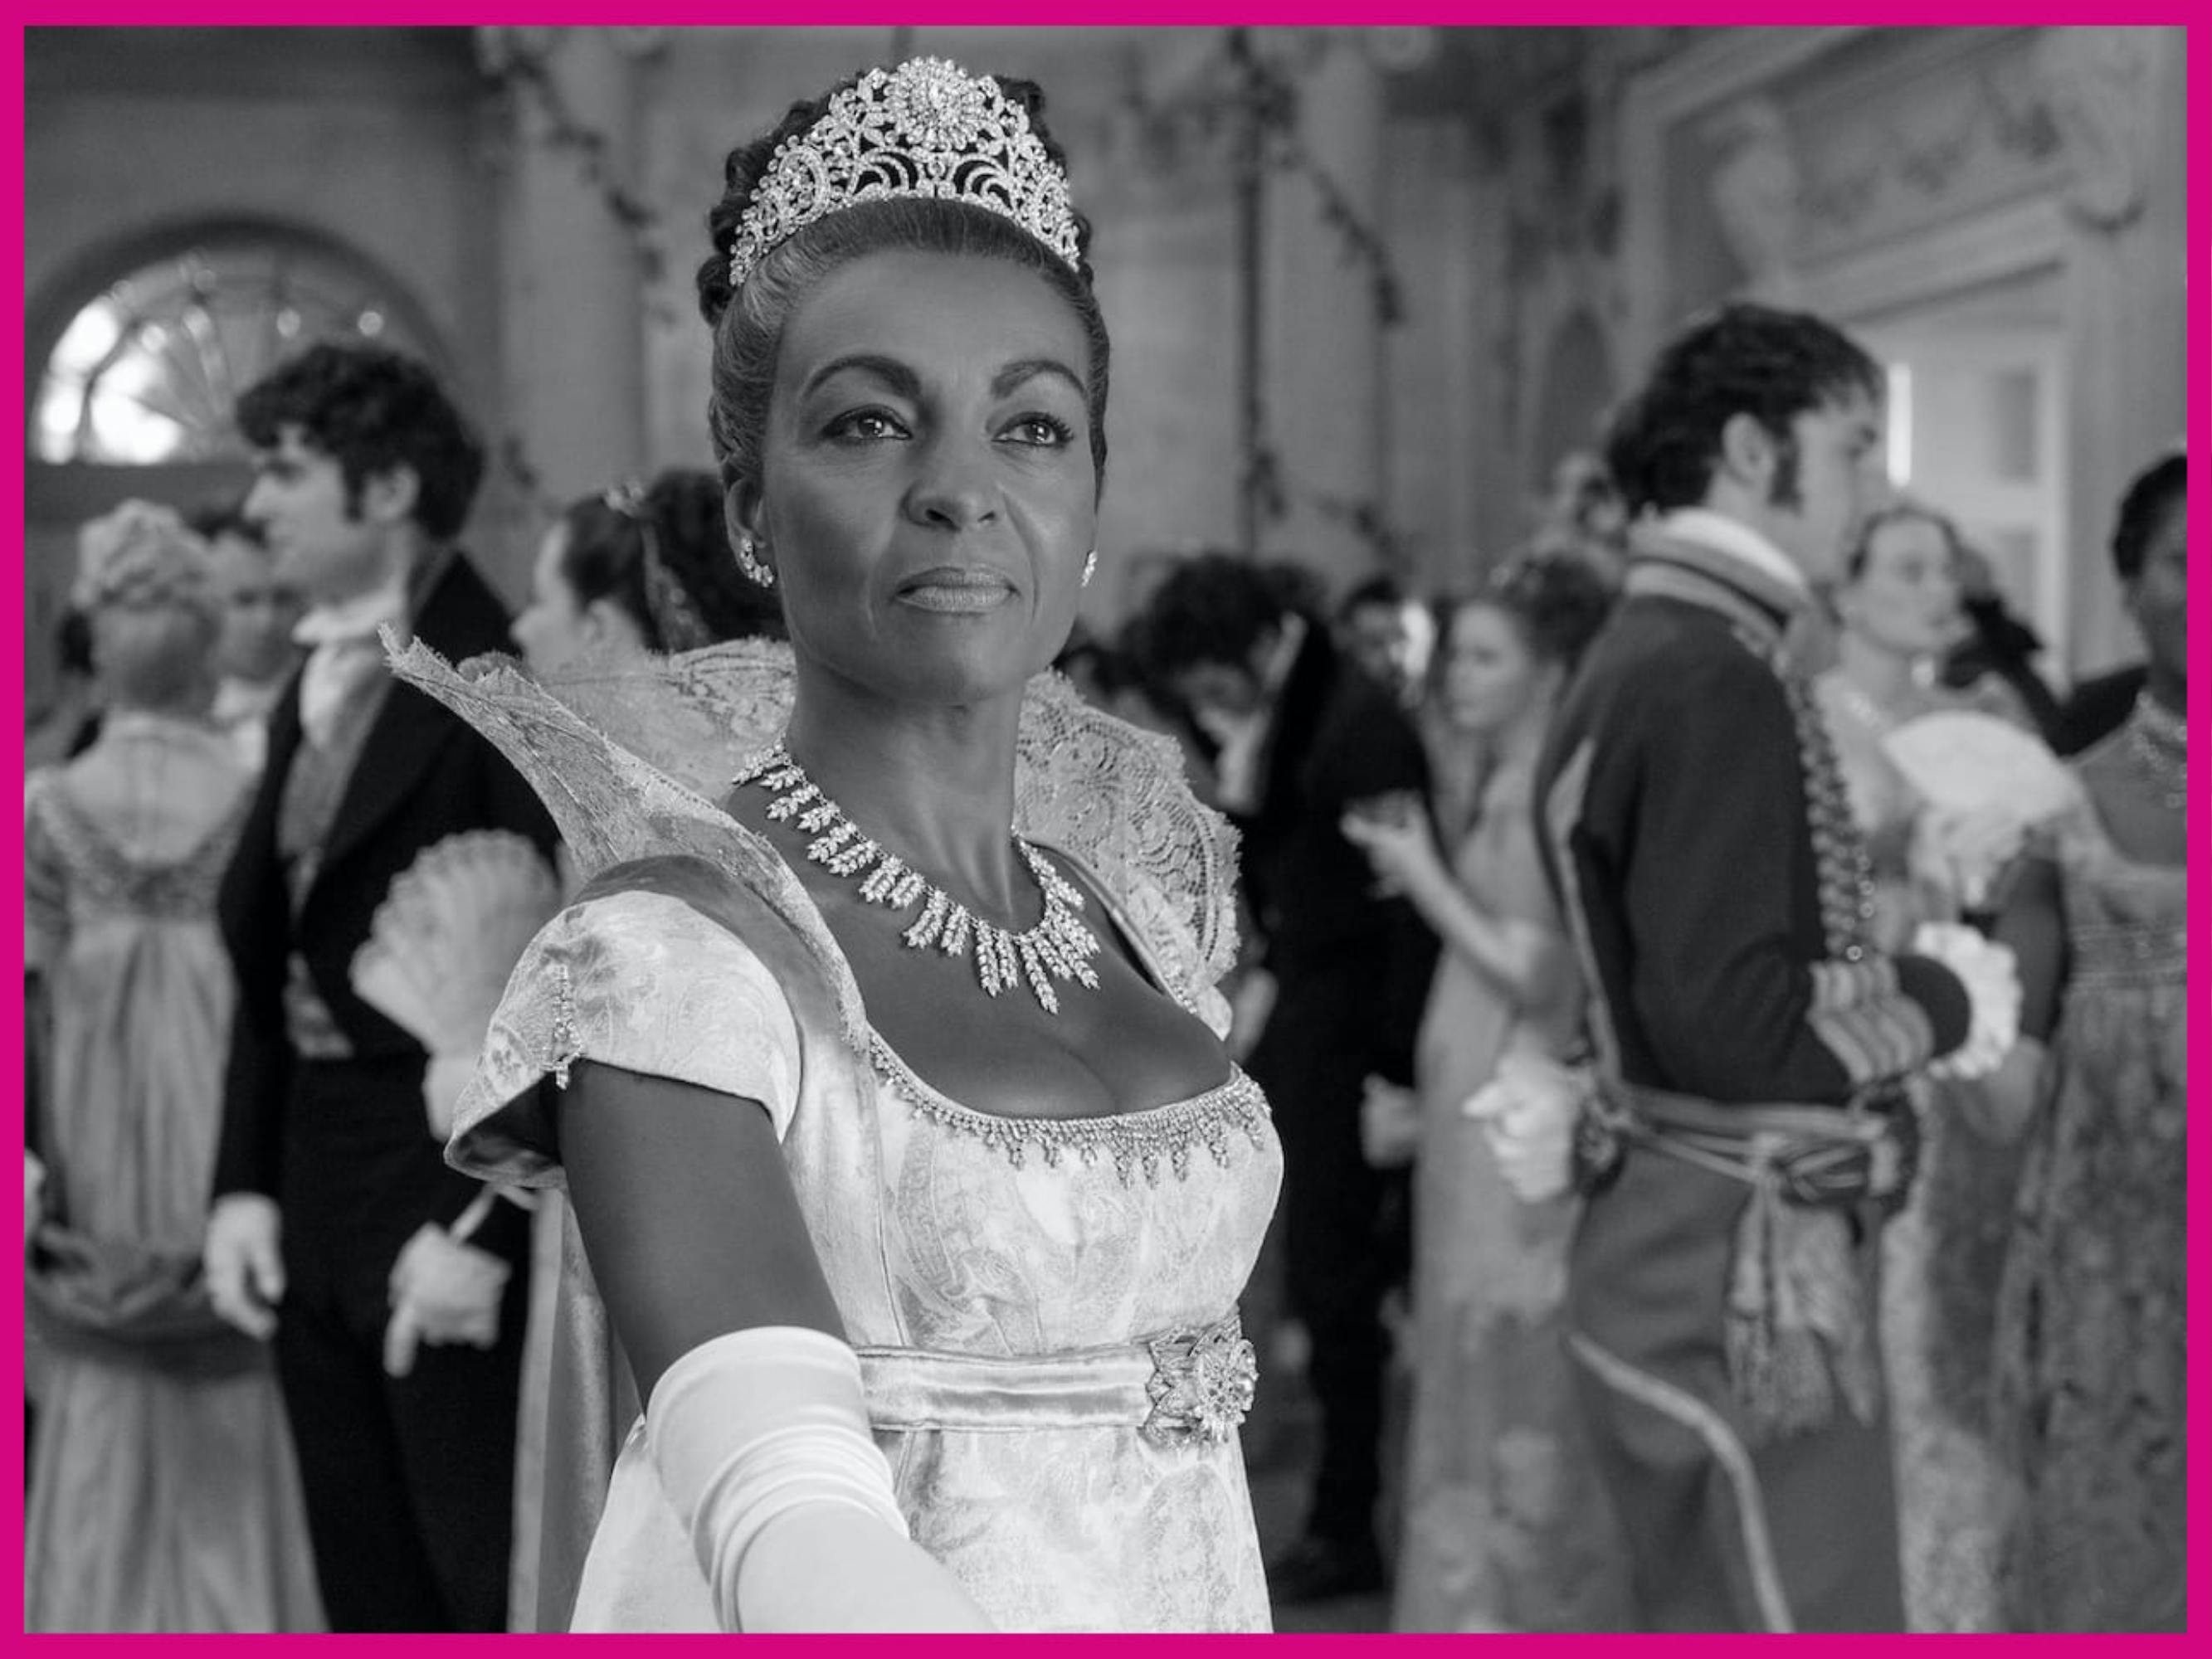 Lady Danbury (Adjoa Andoh) looks incredible in a silvery, white gown, complete with matching tiara and necklace. She reaches her hand out surrounded by other people at the ball dressed in similar finery.